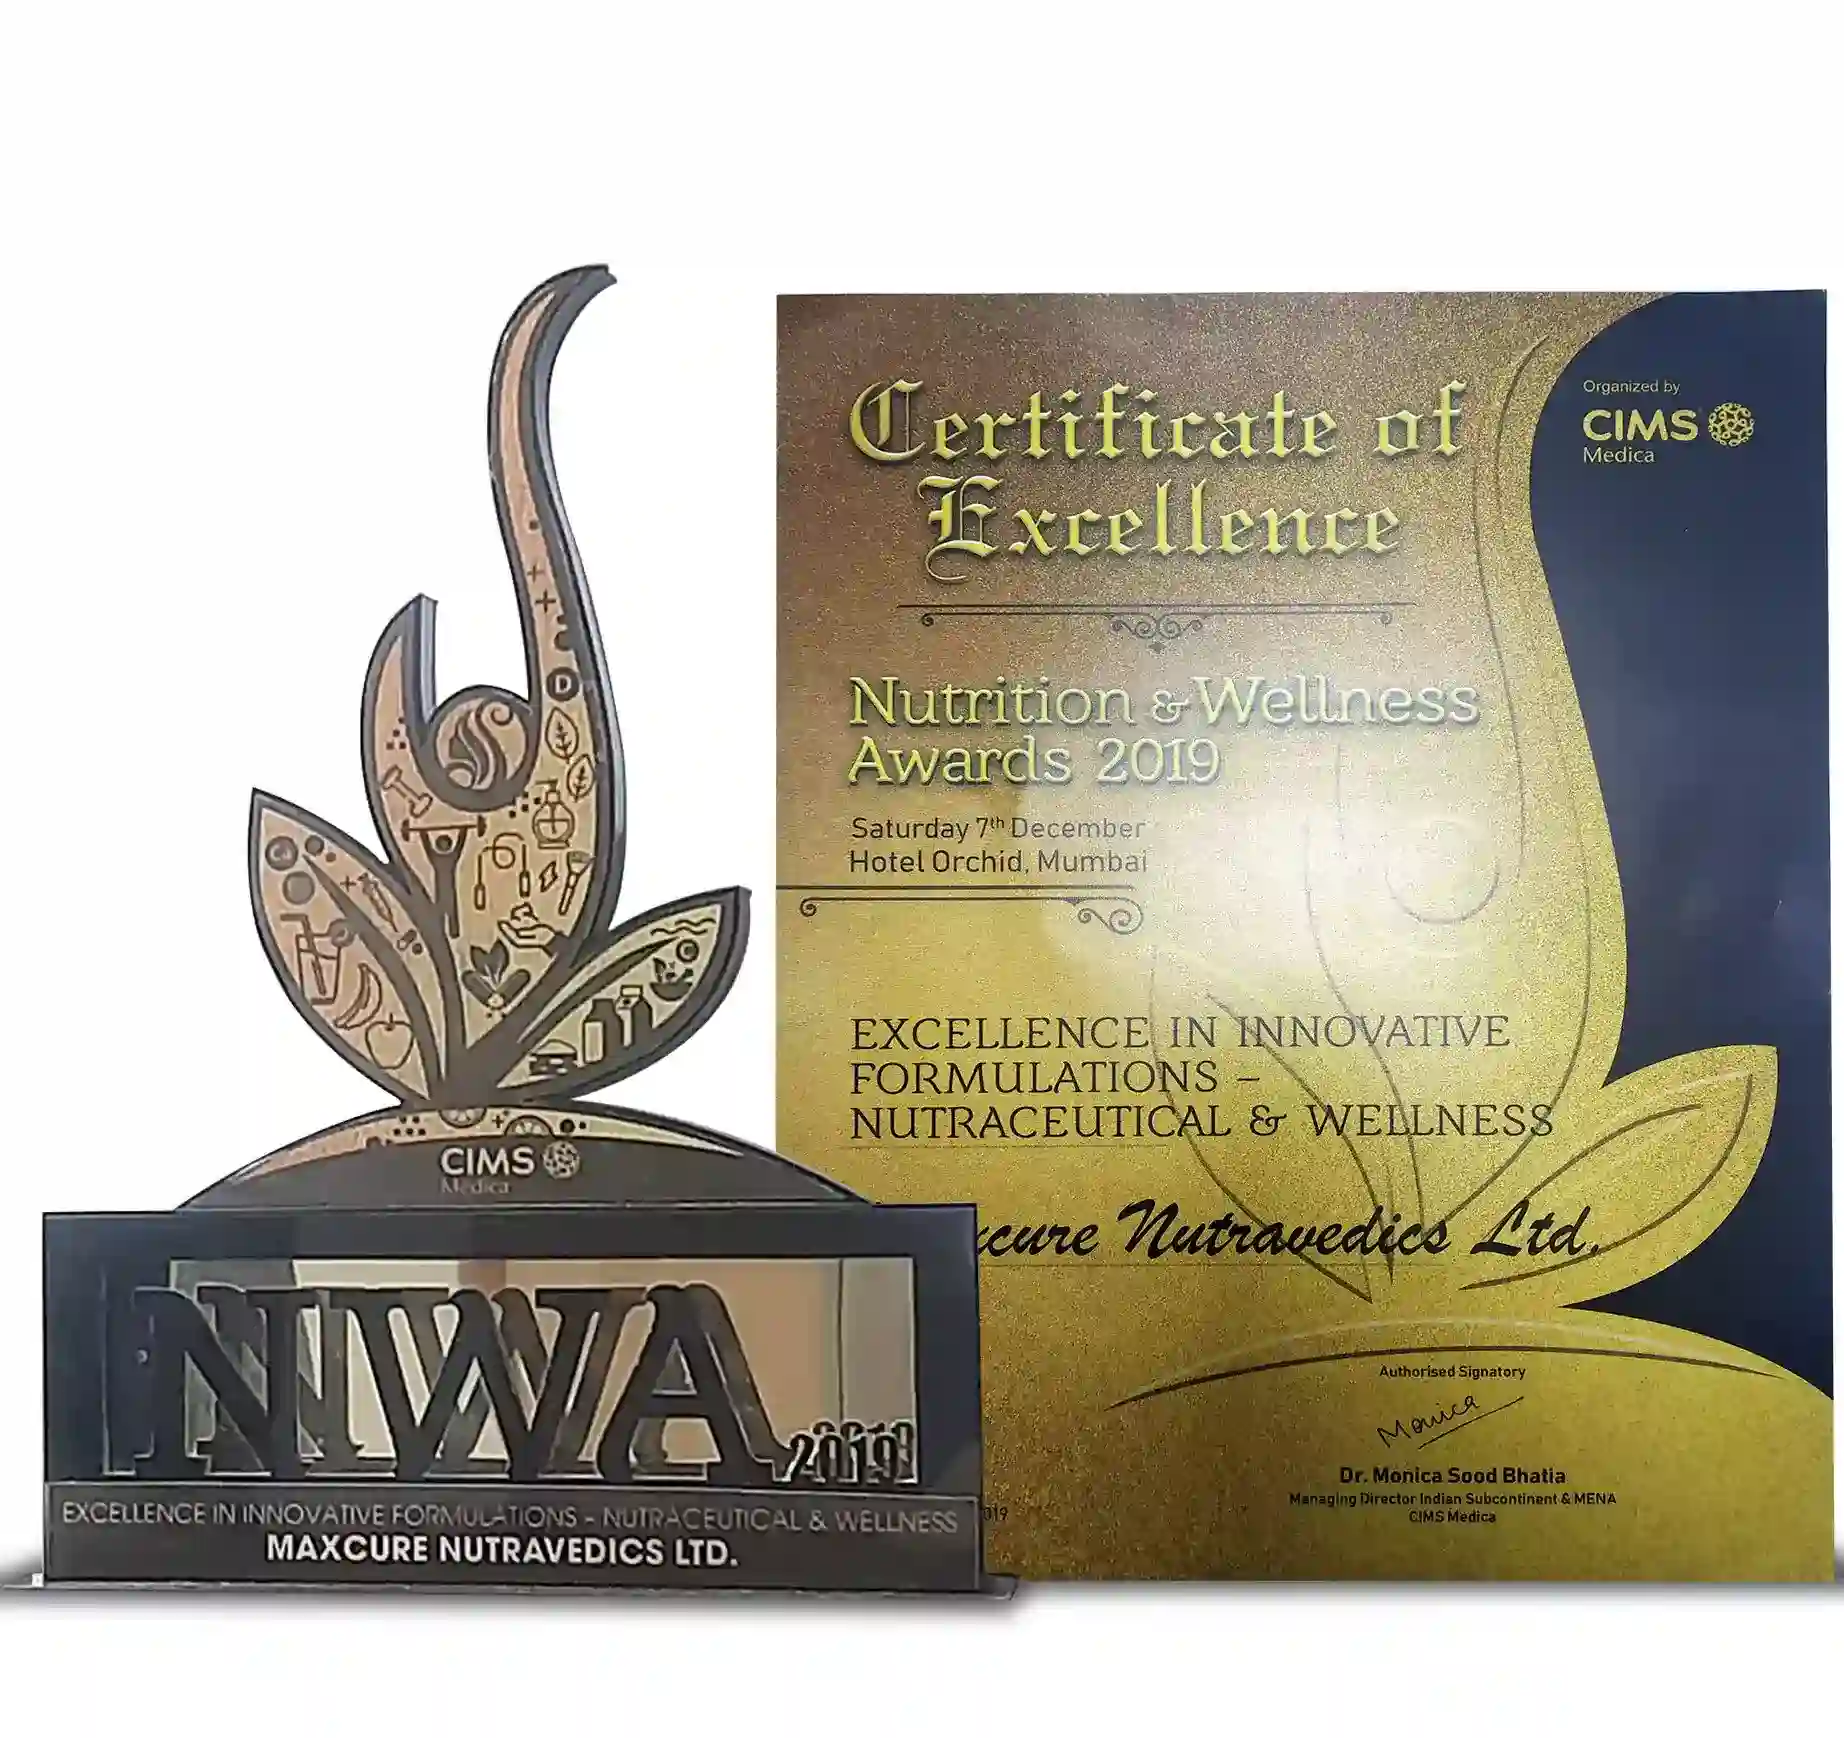 Akums awarded as Excellence-in-Innovative-Formulations-Nutraceutial-Wellness-award-2019-by-CIMS